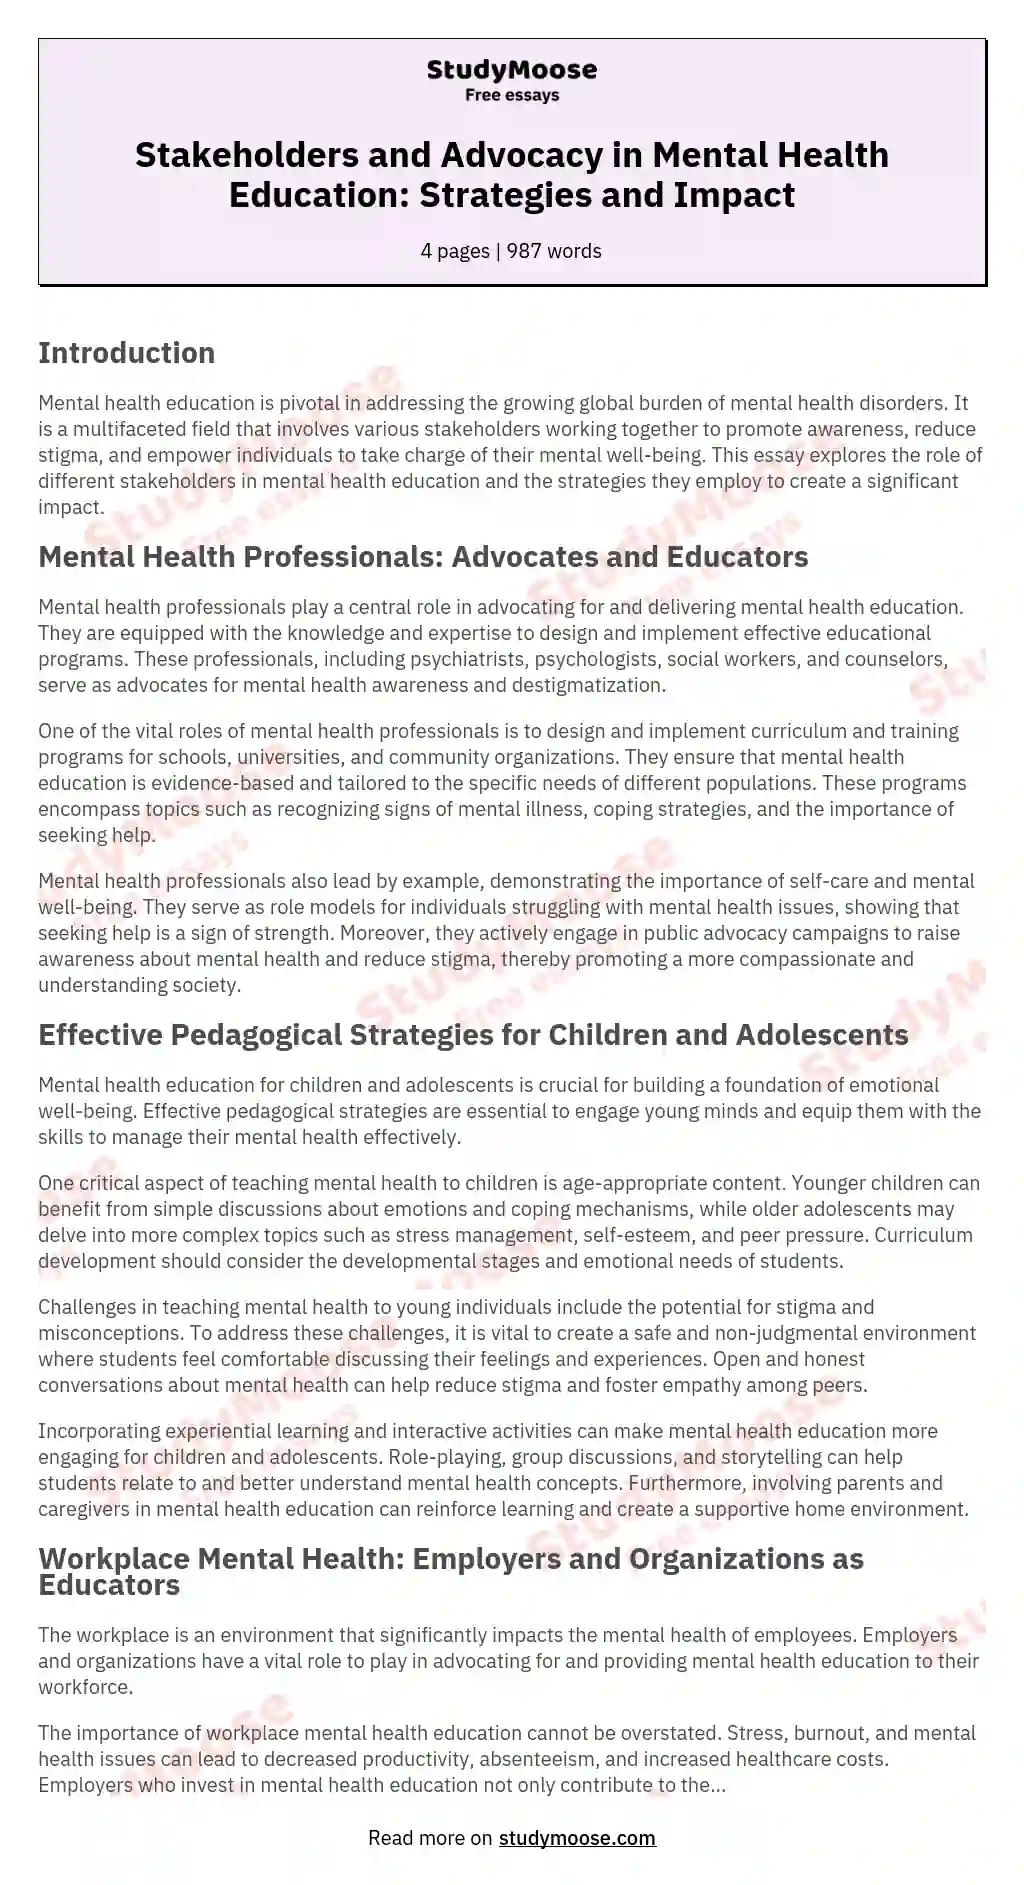 Stakeholders and Advocacy in Mental Health Education: Strategies and Impact essay